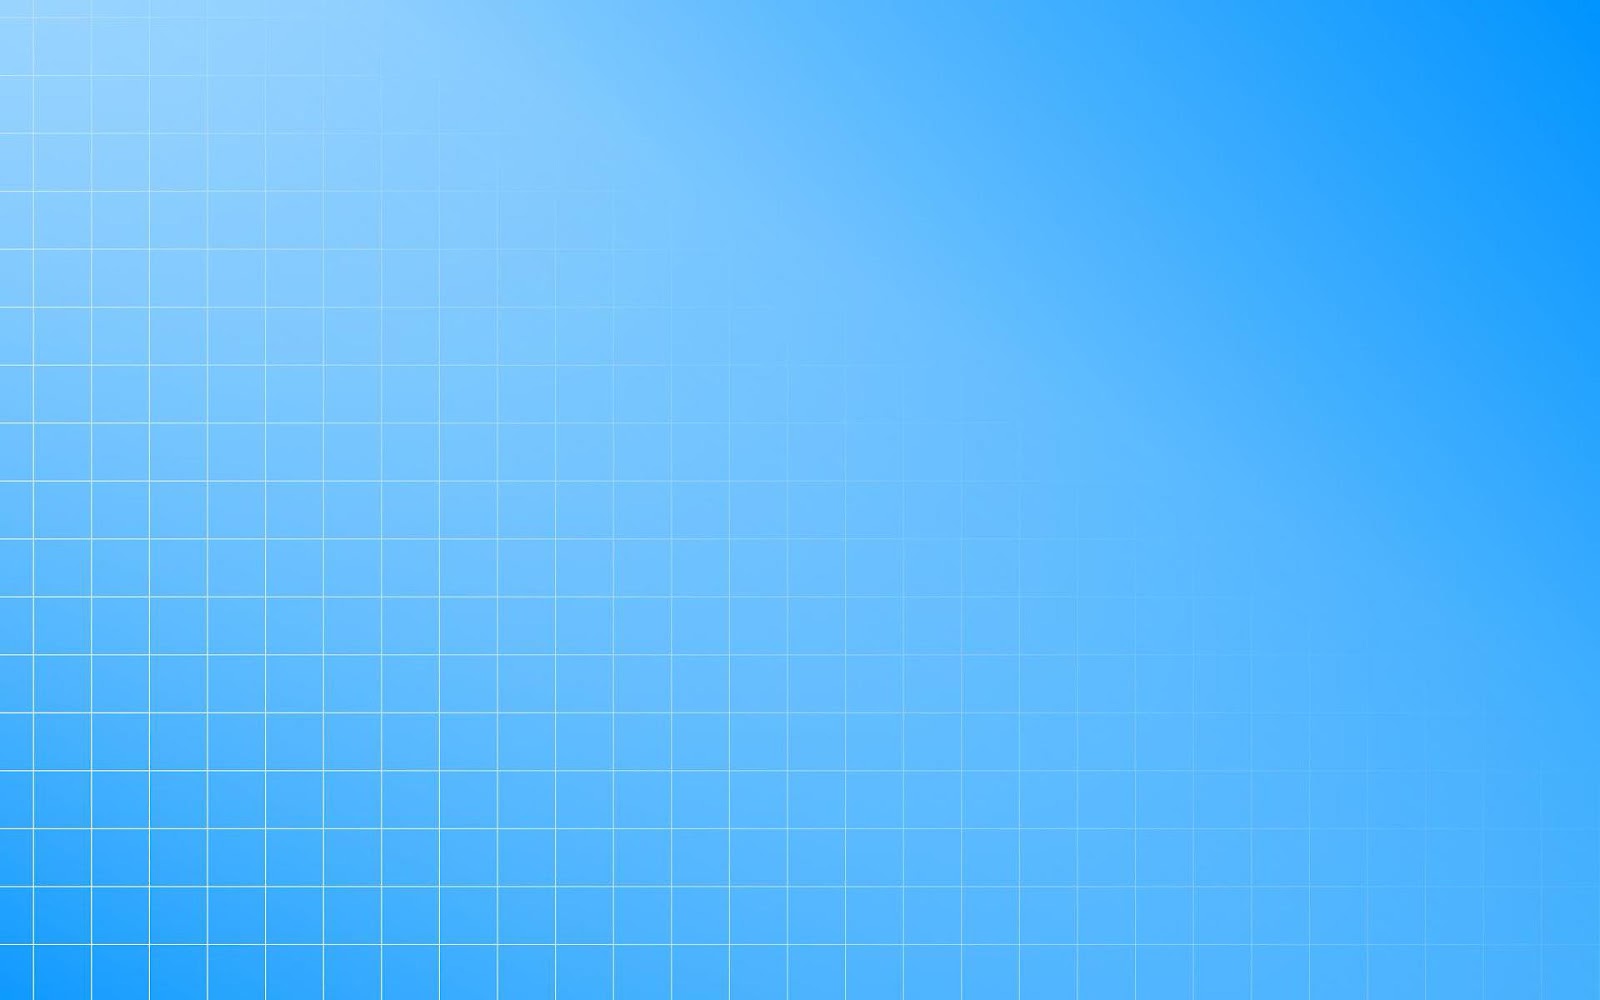 This Is The Blue Squares Background Image You Can Use Powerpoint